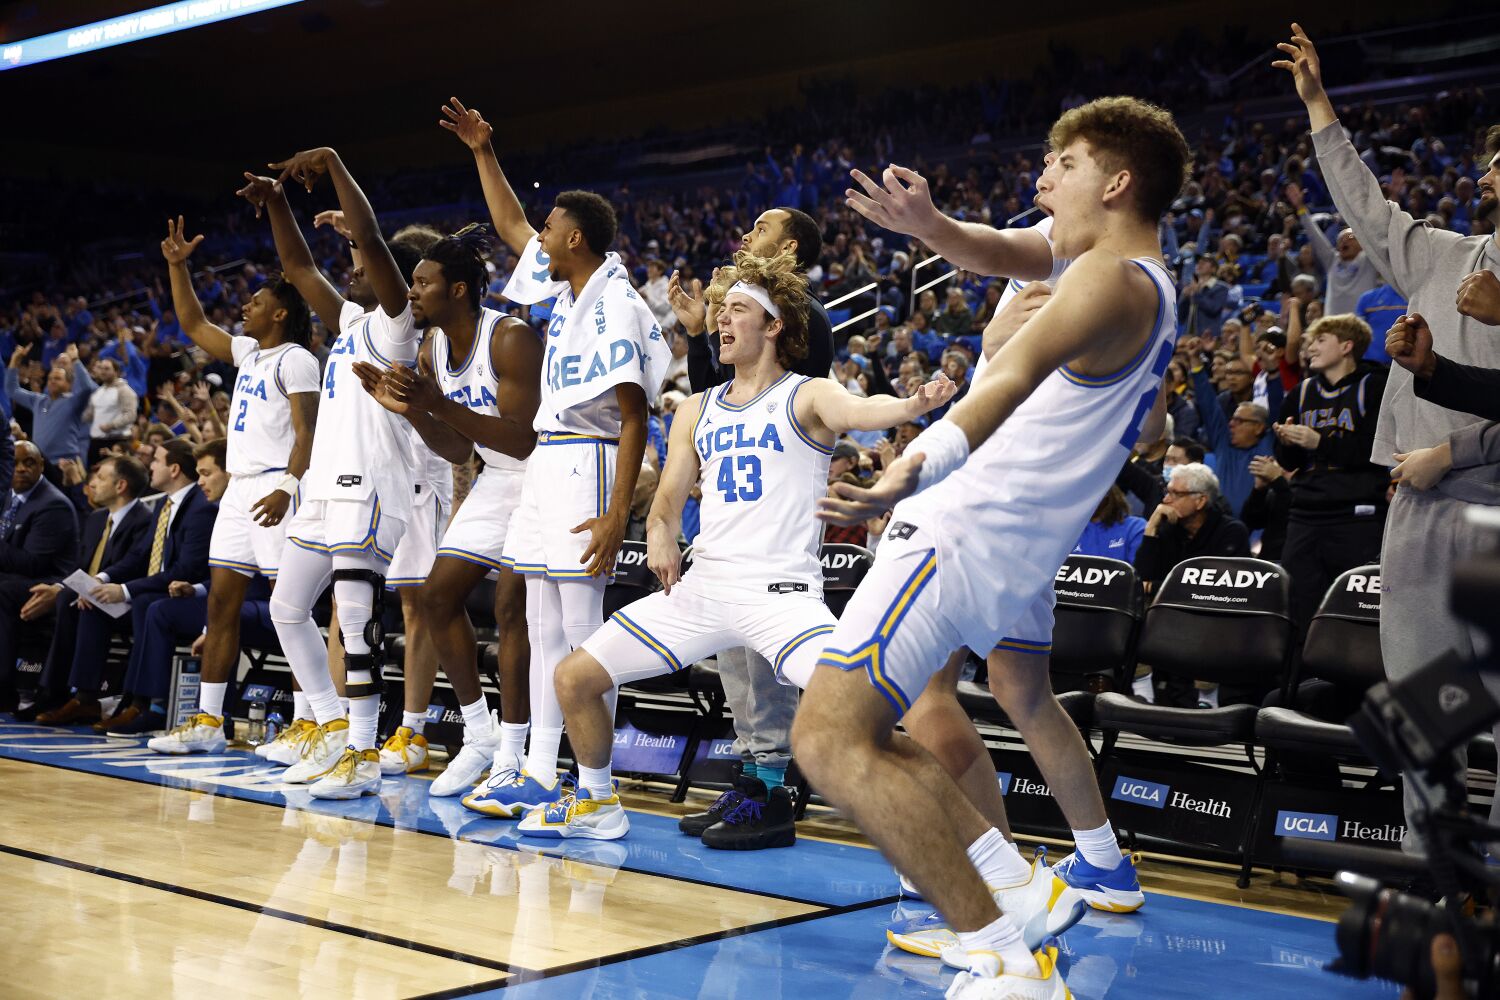 UCLA leans on defense, rallies past Colorado for its 13th consecutive victory